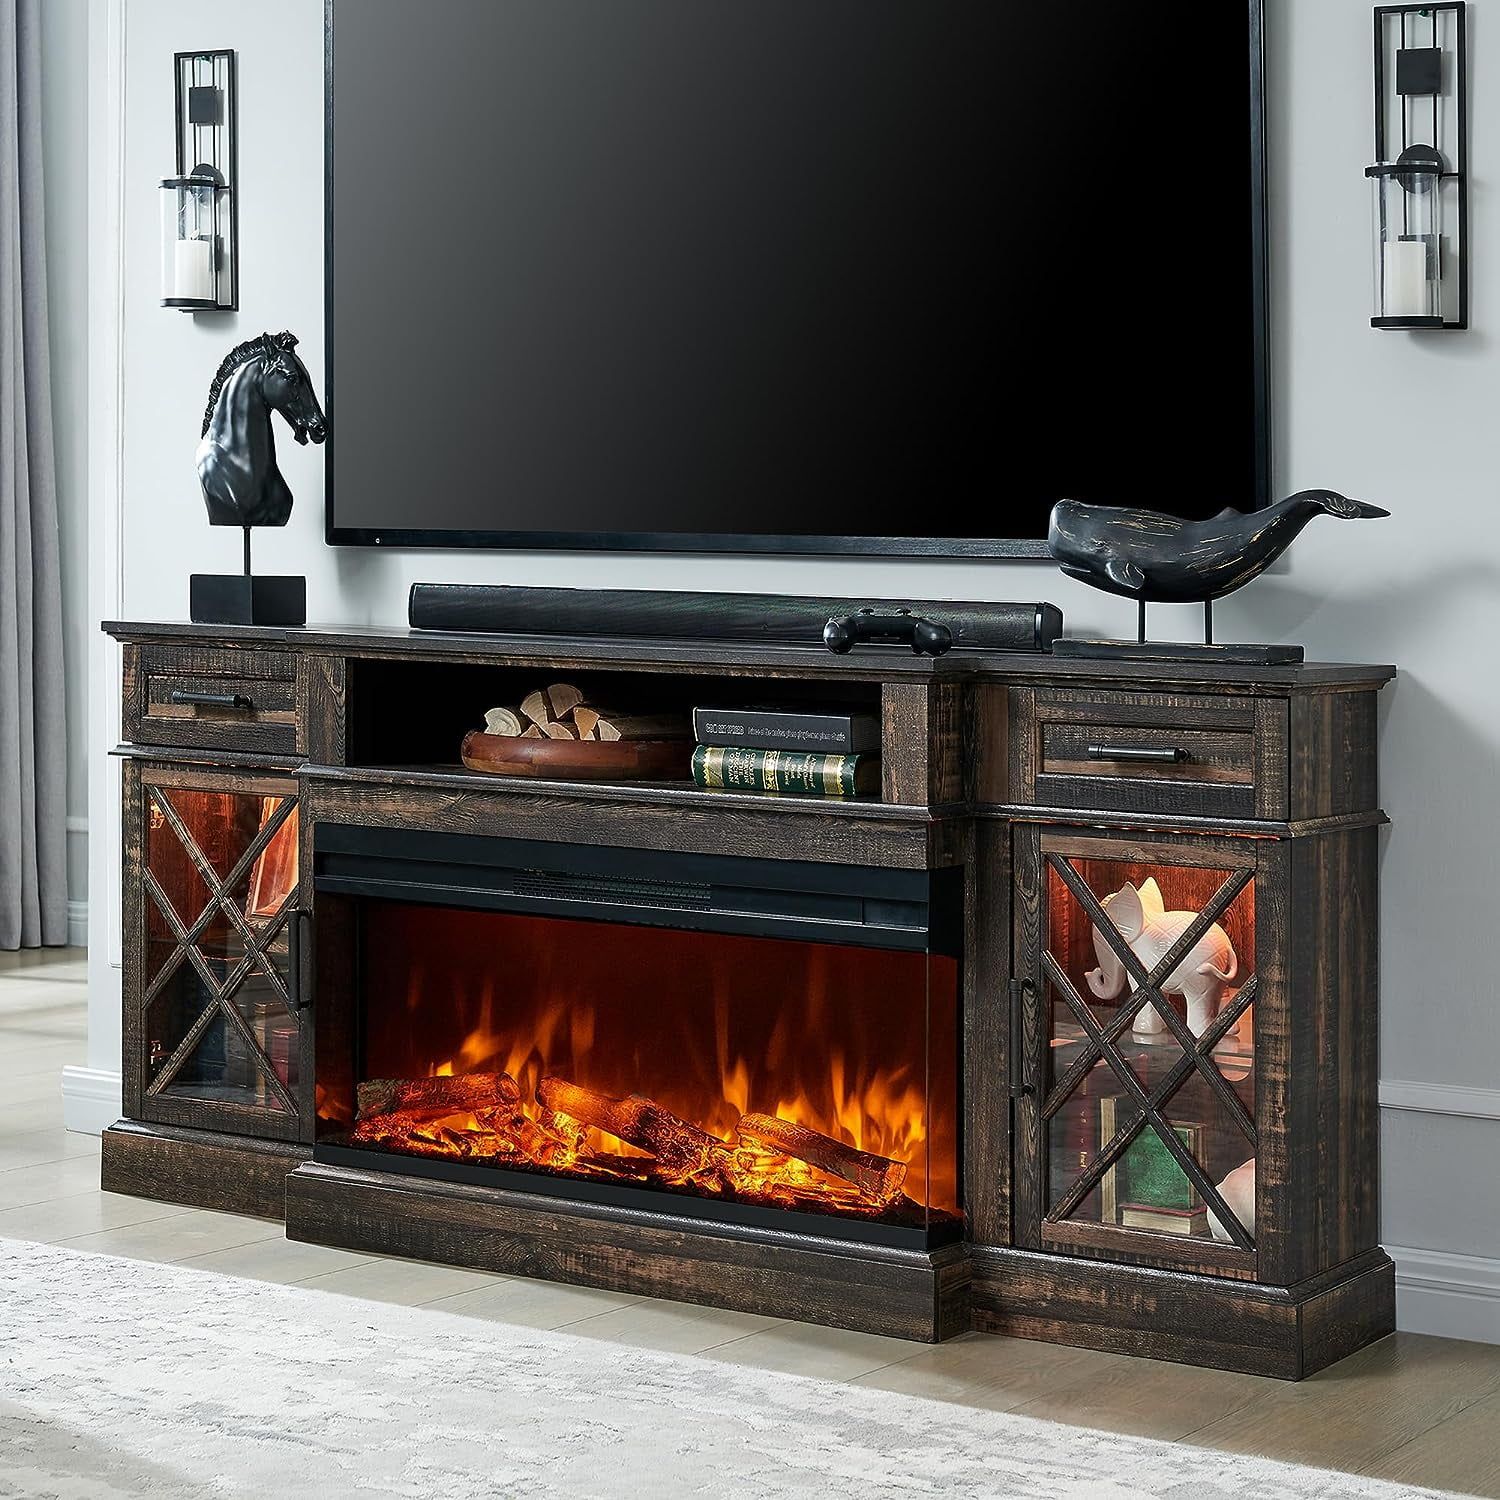 Okd 3 Sided Glass Farmhouse 70" Fireplace Tv Stand For Tvs Up To 80",  Highboy Entertainment Center With 36" Electric Fireplace, Dark Rustic Oak –  Walmart In Tv Stands With Electric Fireplace (Photo 14 of 15)